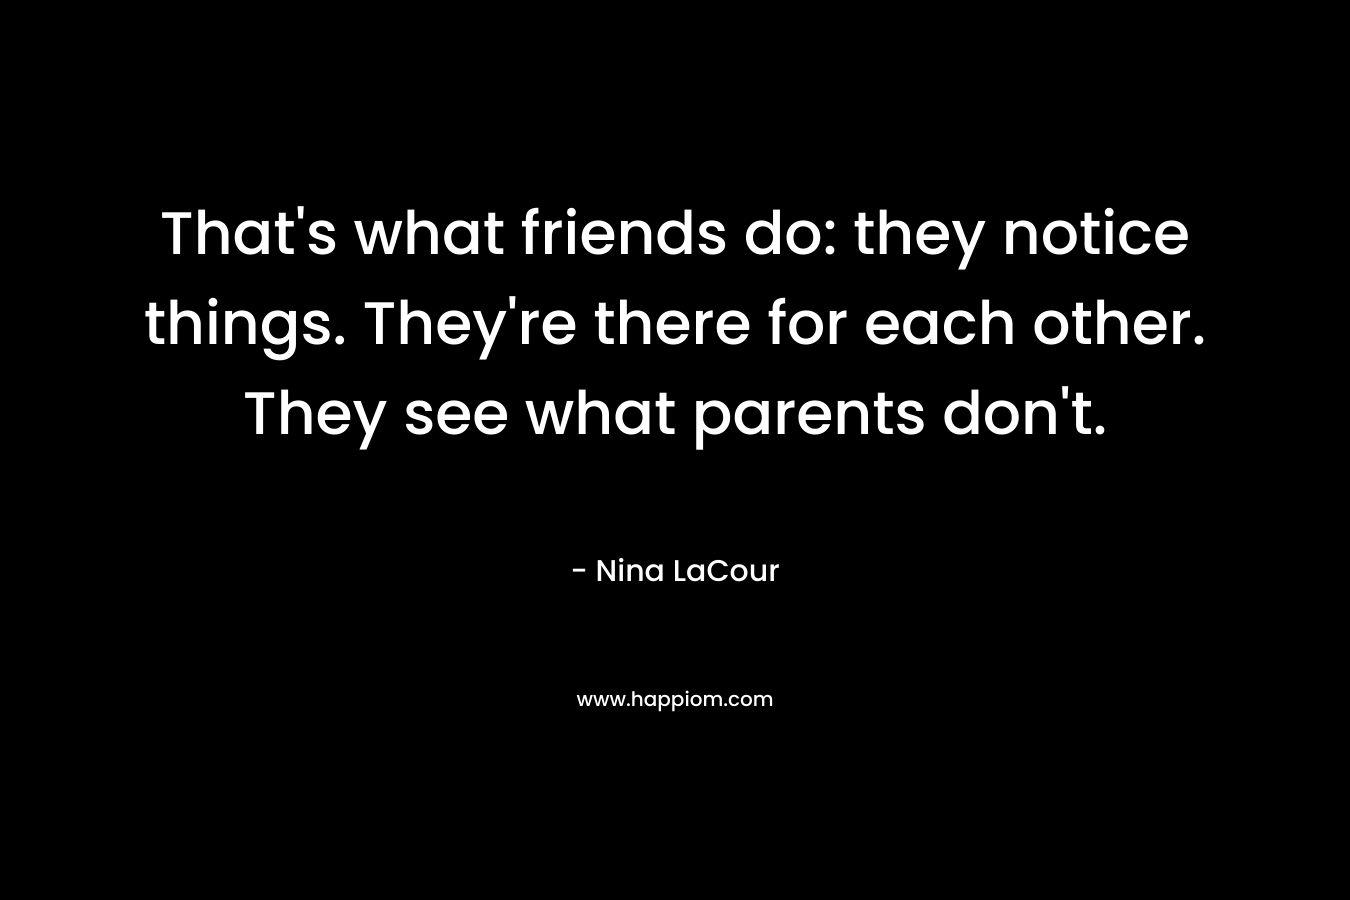 That’s what friends do: they notice things. They’re there for each other. They see what parents don’t. – Nina LaCour